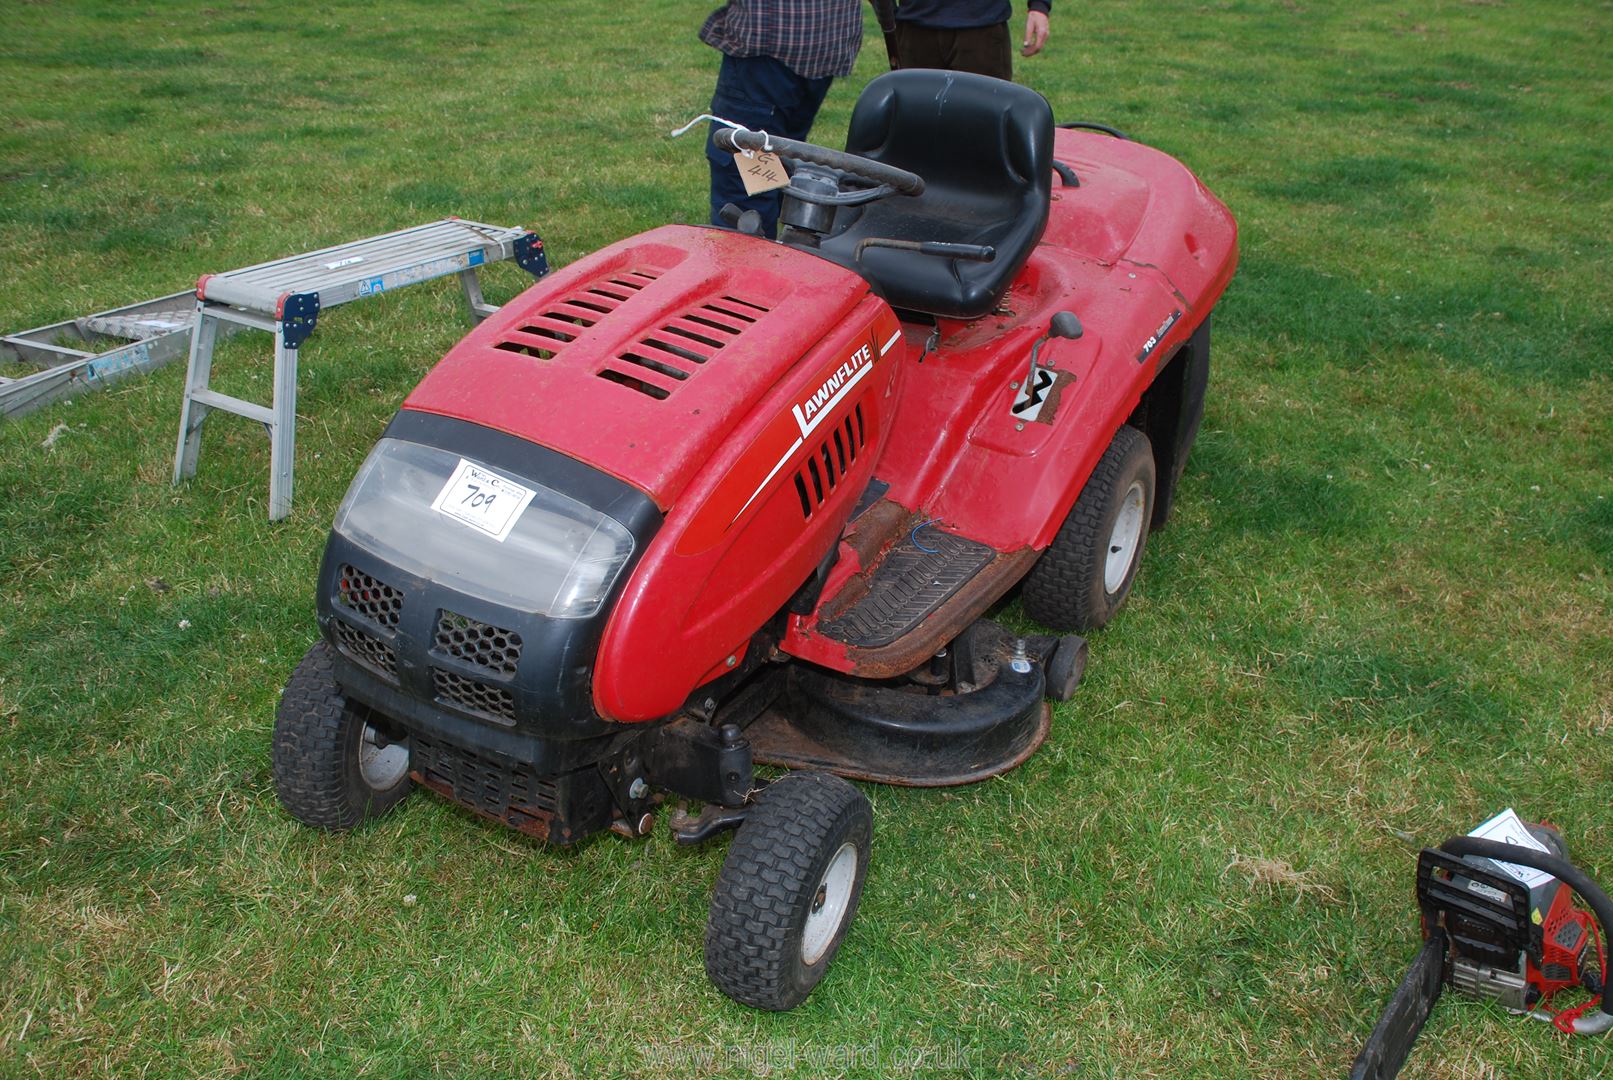 A Lawn-flite Ride-on mower with Briggs & Stratton 13.5 hp overhead valve engine.